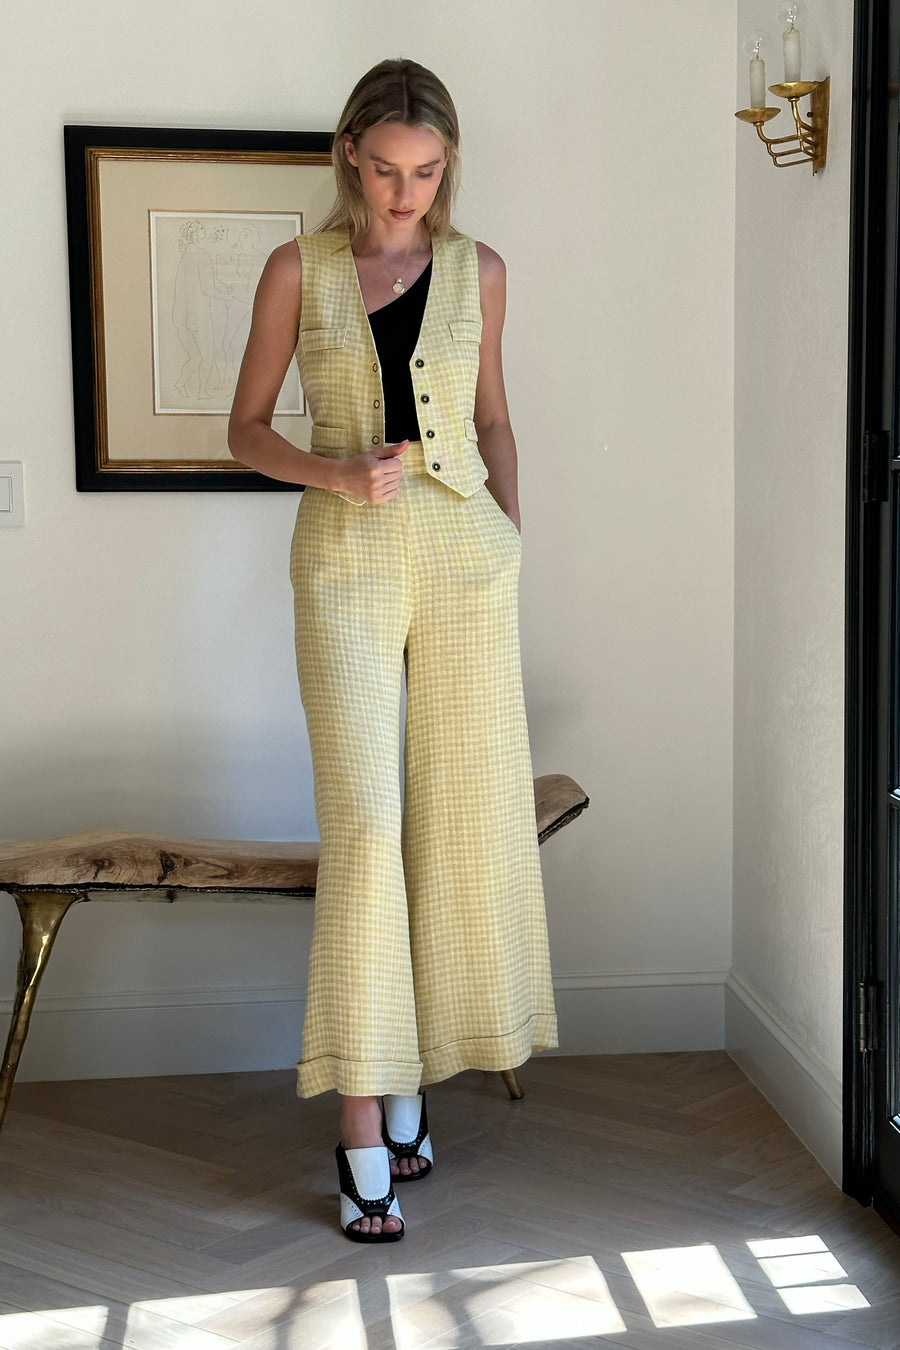 Darcy Vest : White and Yellow Summer Houndstooth